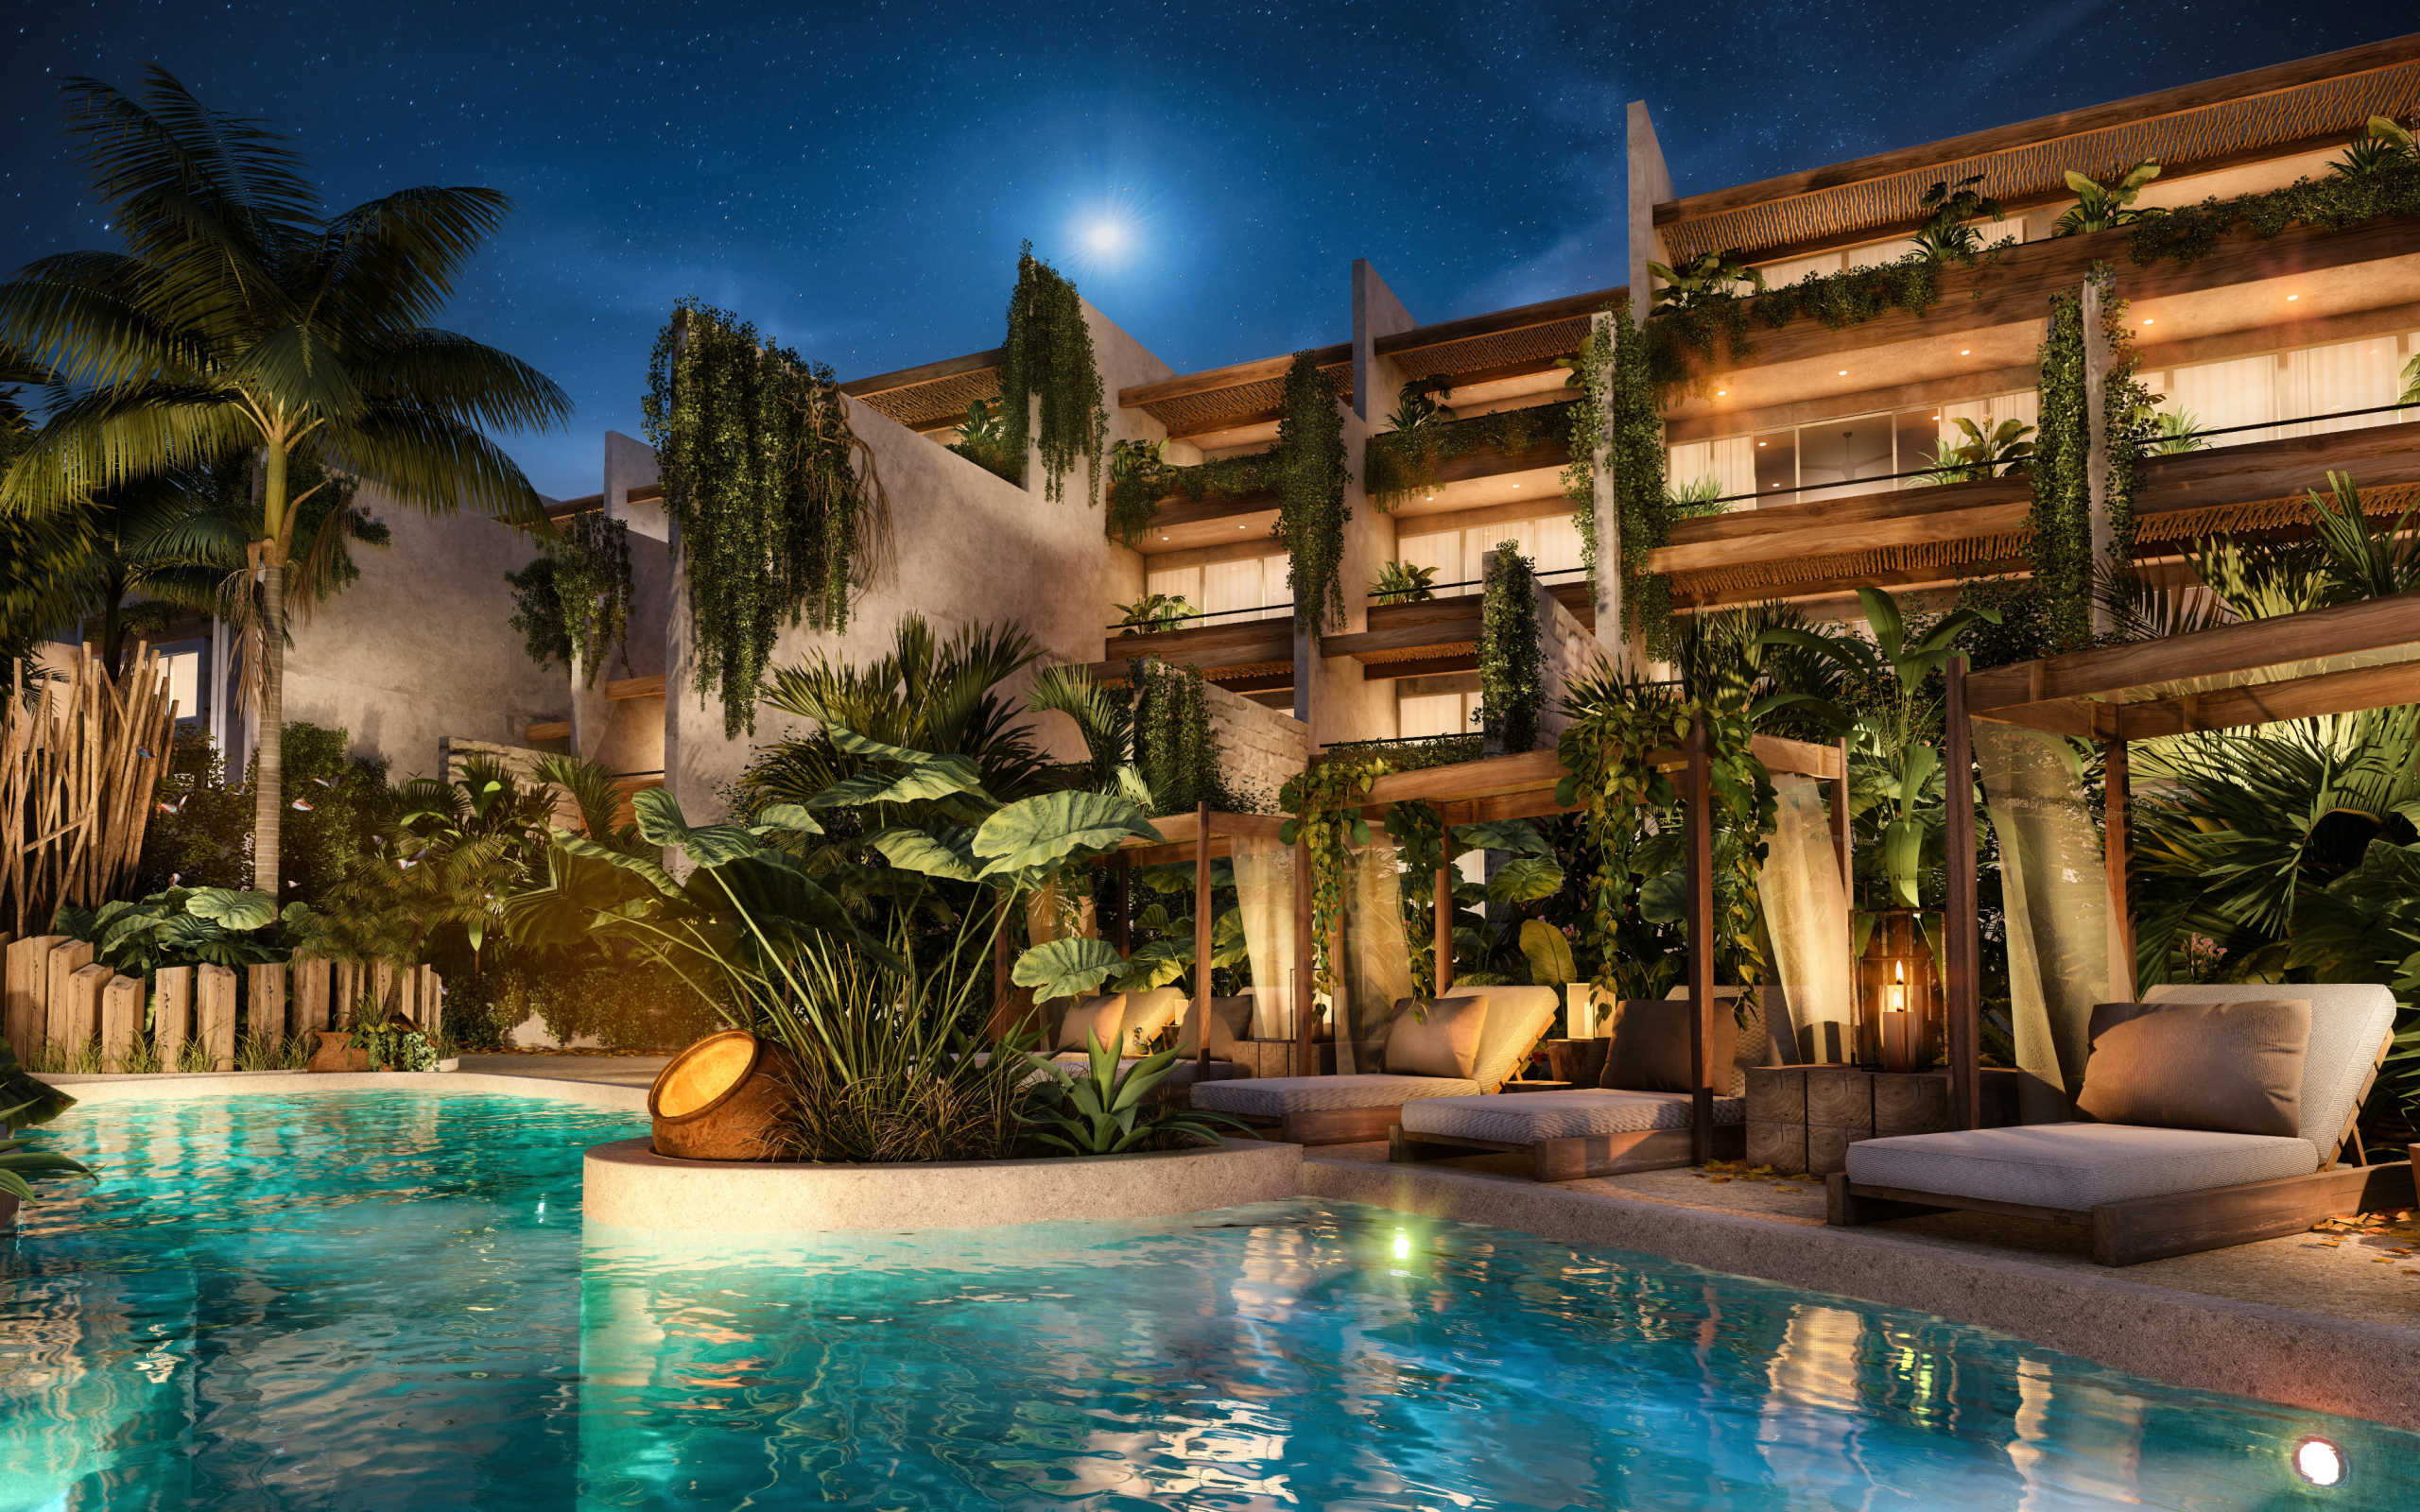 Mayaliah Hotel & Residences with amenities and services in Tulum.